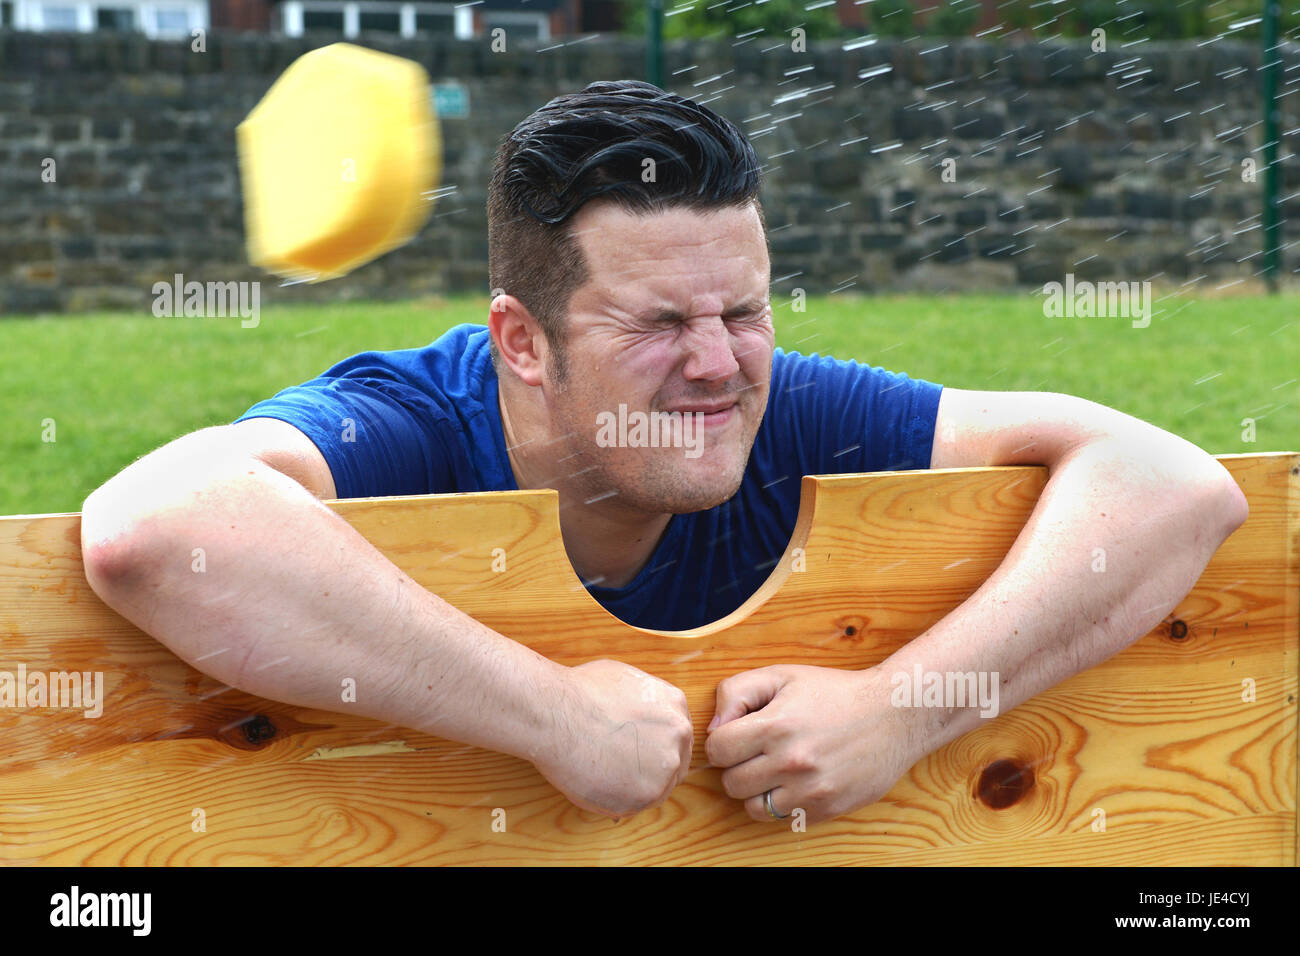 A man in wooden stocks has a wet sponge thrown at him at a traditional British summer fair. Stock Photo